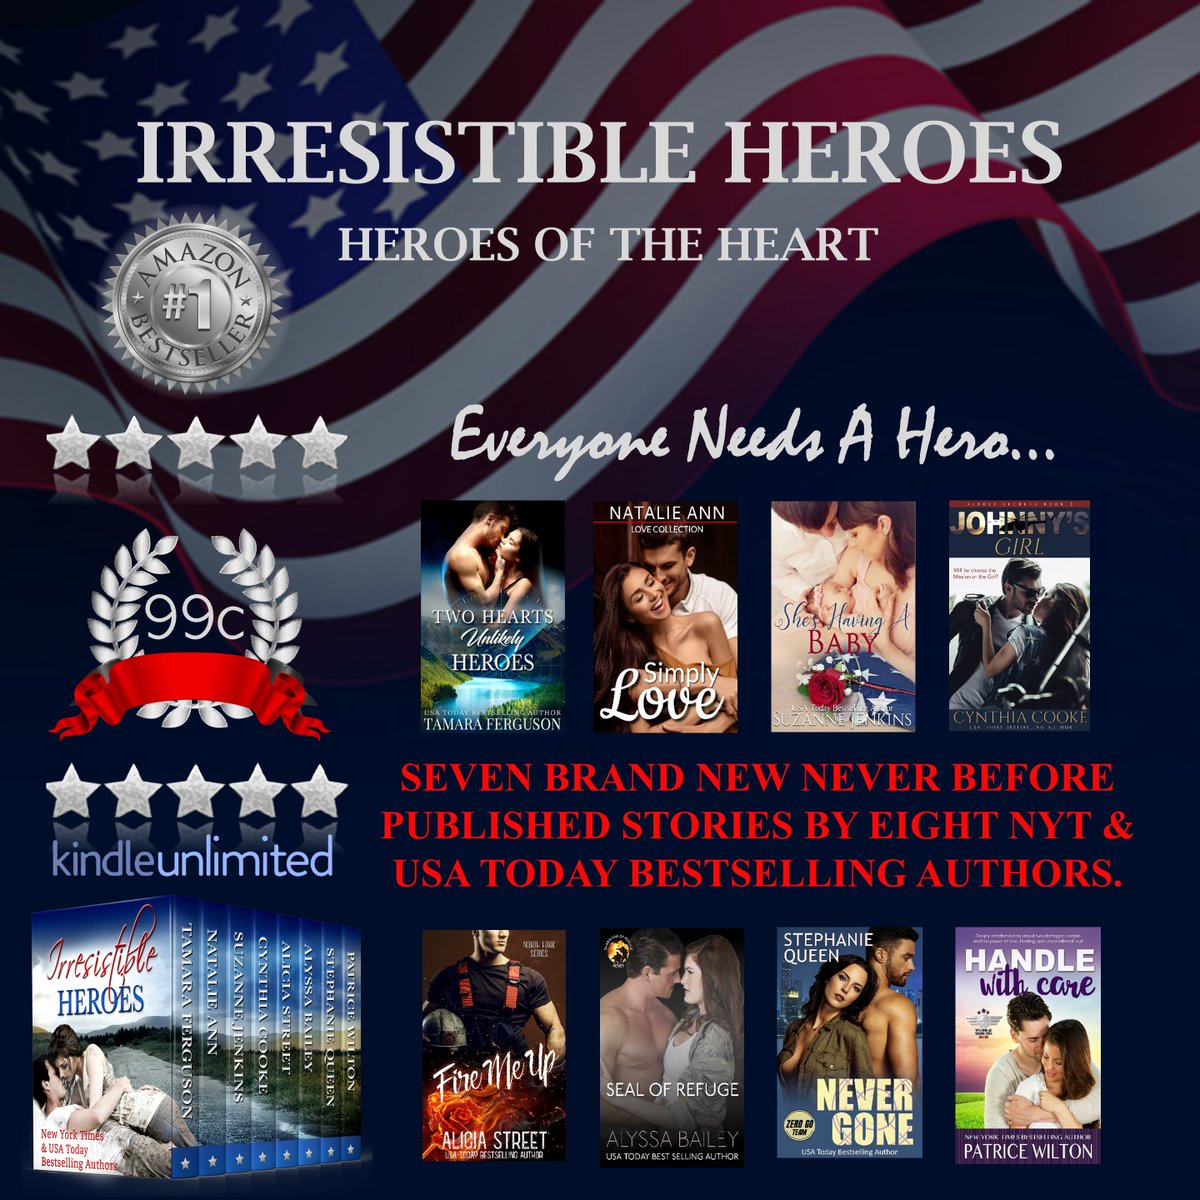 ♥.¸•★`.¸•★`.¸¸.`★•¸.♥ #IrresistibleHeroes FIND YOUR HERO in this steamy premiere series featuring strong heroes and heroines who save lives and put their lives on the line. A NUMBER ONE BESTSELLER. ♥#mgtab ♥@mimisgang1 mybook.to/IrresistibleHe…